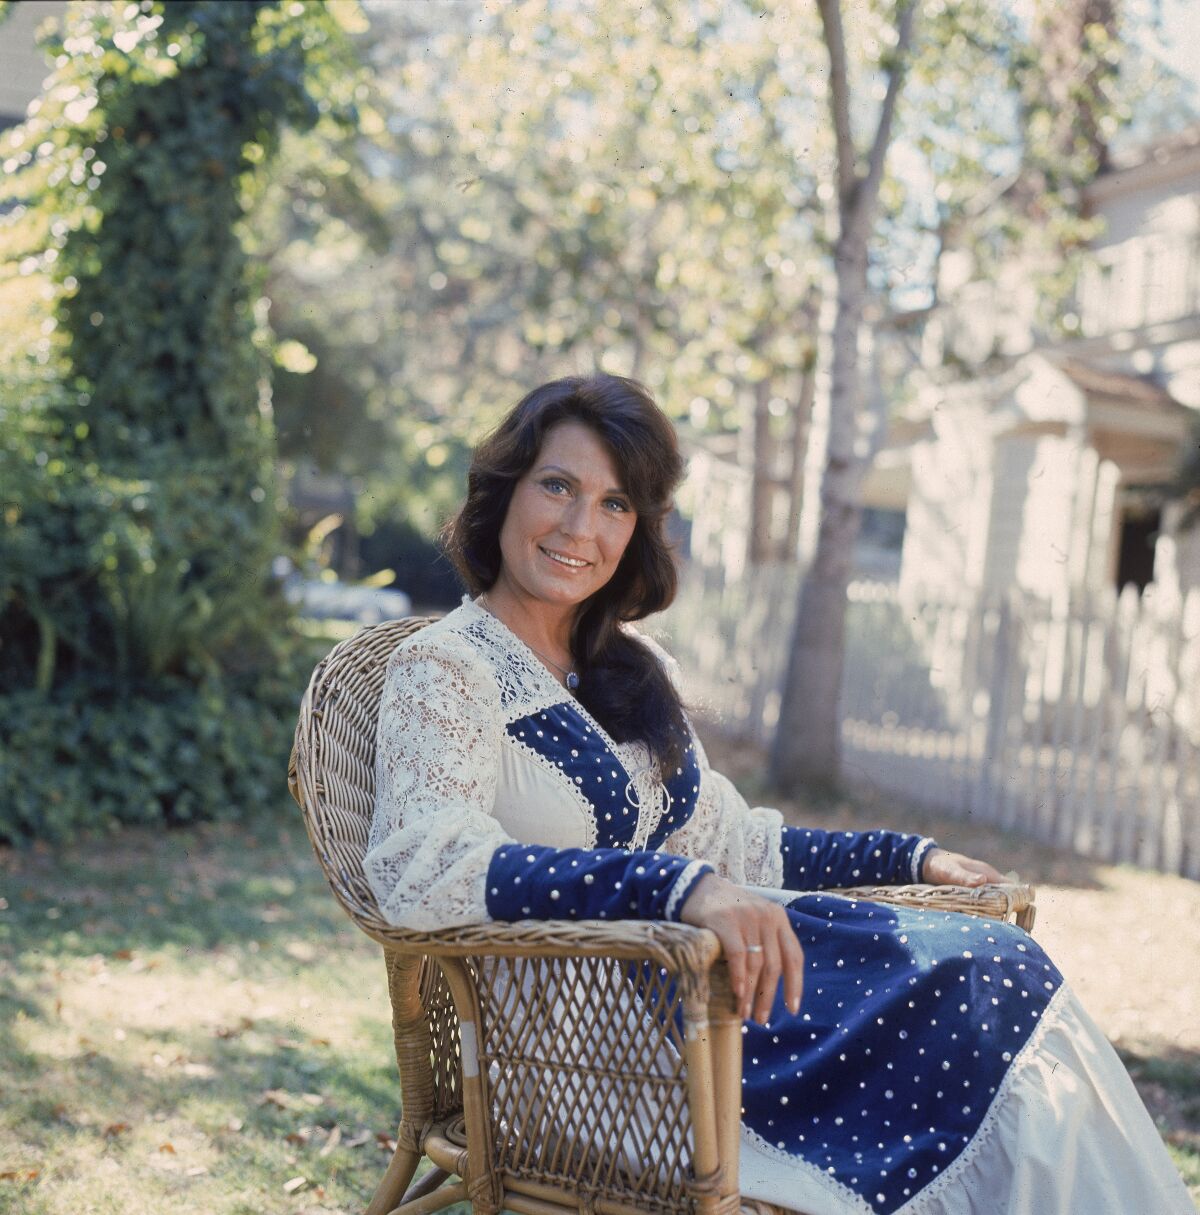 A female country singer sits in a chair outside